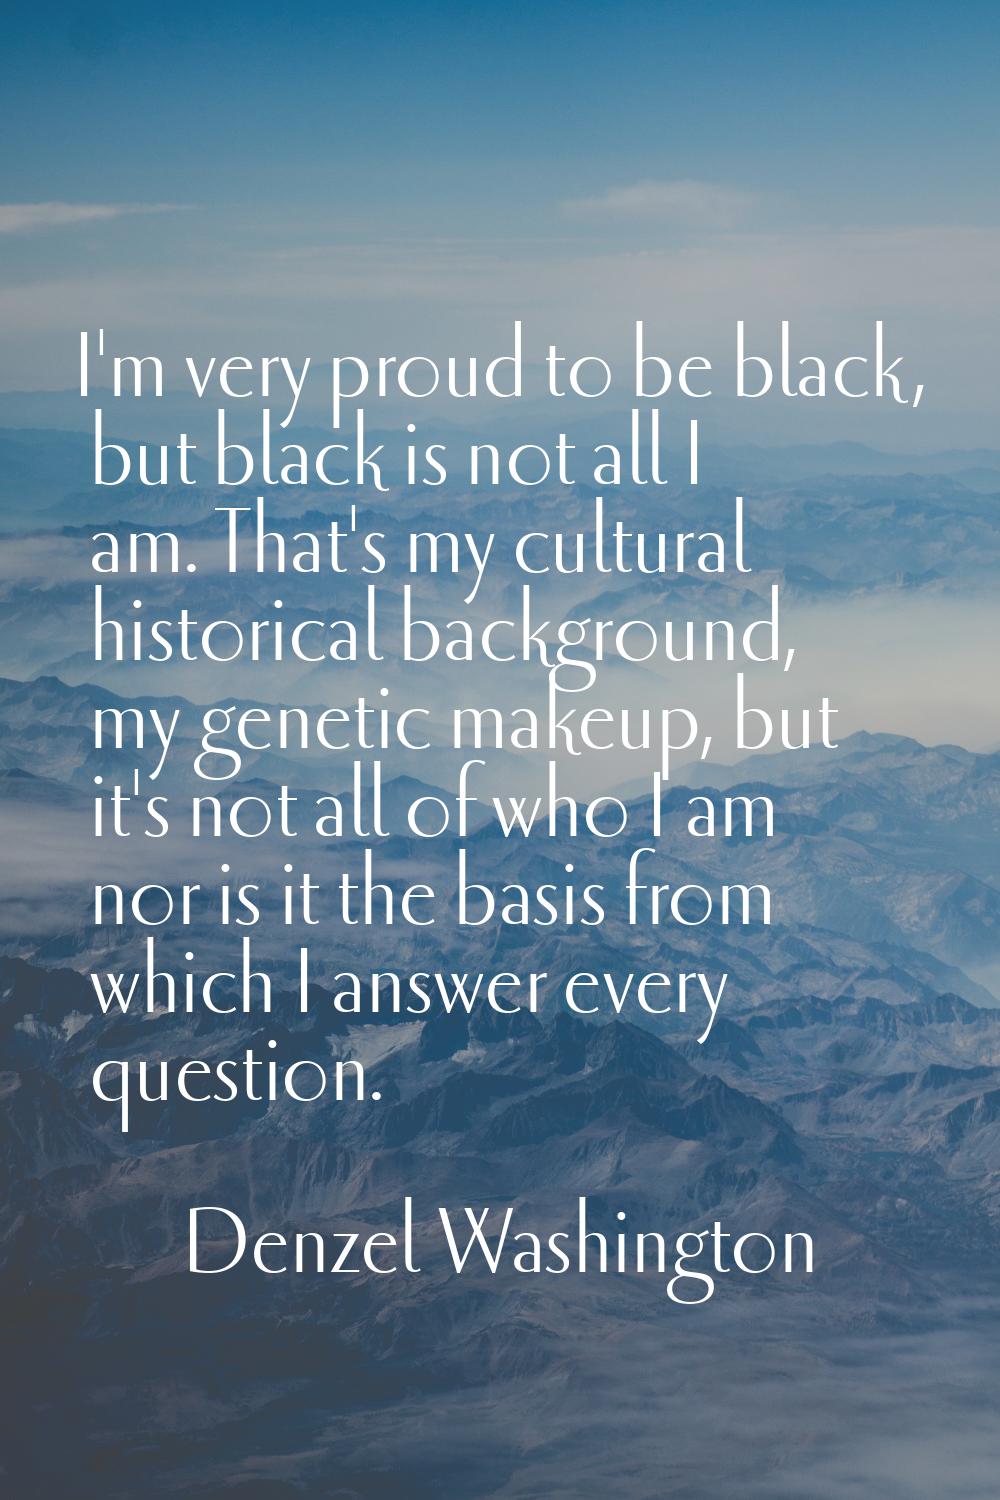 I'm very proud to be black, but black is not all I am. That's my cultural historical background, my